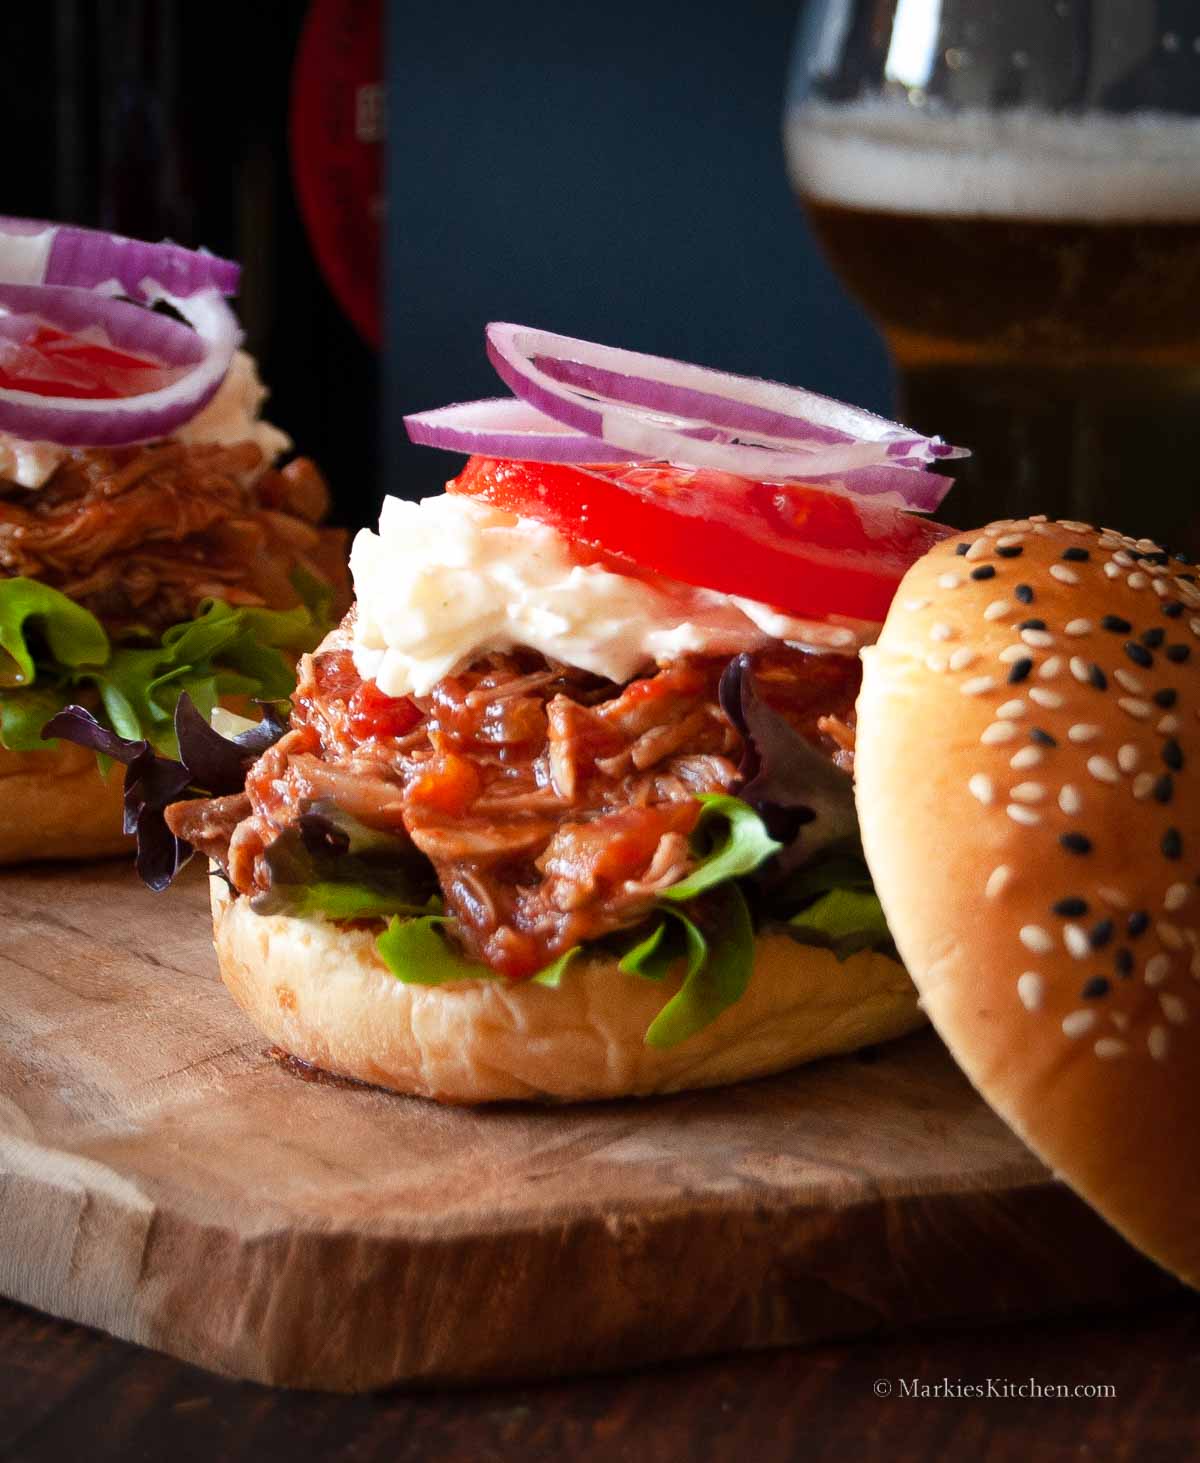 A close up photo of an open sandwich with pulled pork, creamy coleslaw, sliced tomato and sliced red onion. The burger is placed on a wooden board, and there is a glass of beer in the background.